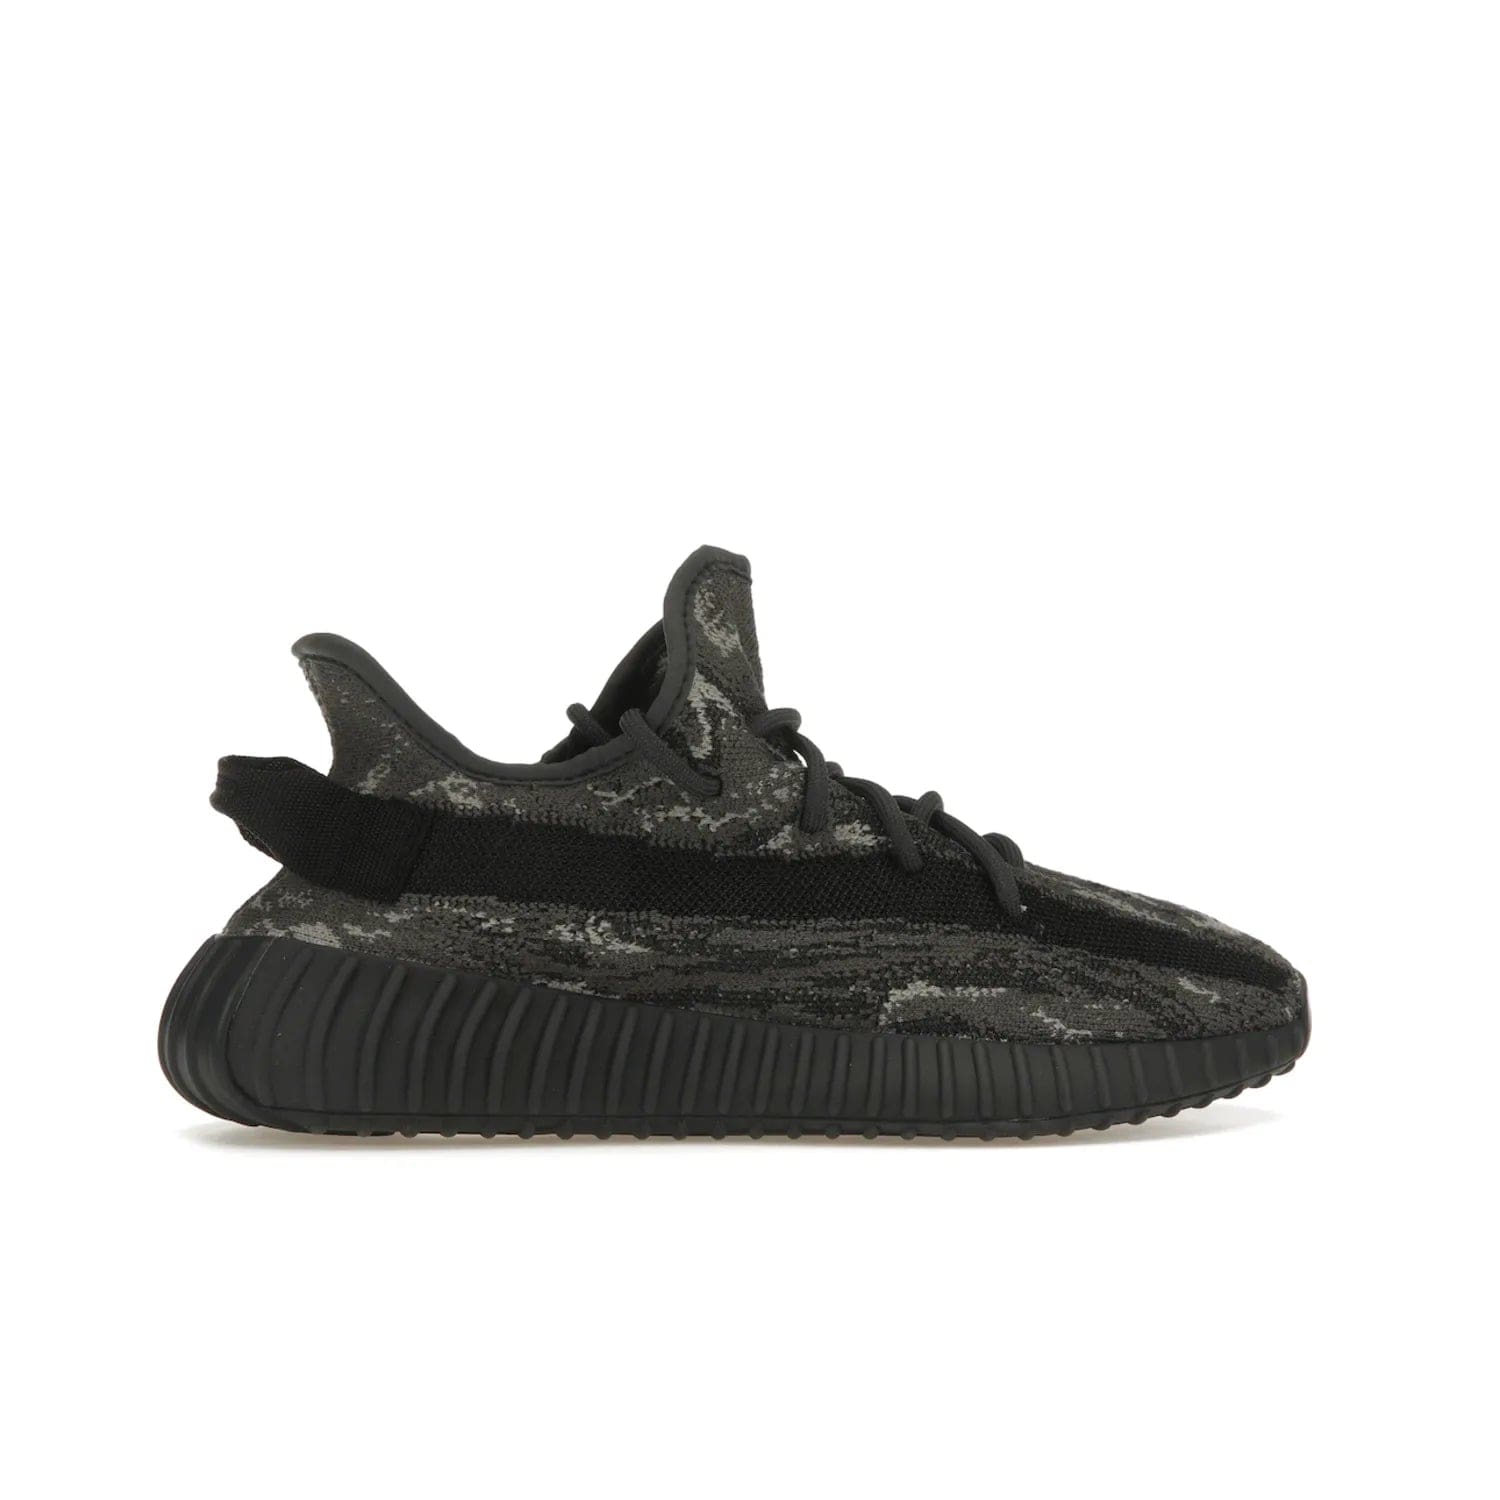 adidas Yeezy Boost 350 V2 MX Dark Salt - Image 36 - Only at www.BallersClubKickz.com - ##
The adidas Yeezy Boost 350 V2 MX Dark Salt offers a contemporary look with a signature combination of grey and black hues. Cushioned Boost midsole and side stripe allow for all day wear. Get the perfect fashion-forward addition with this sleek sneaker for $230.